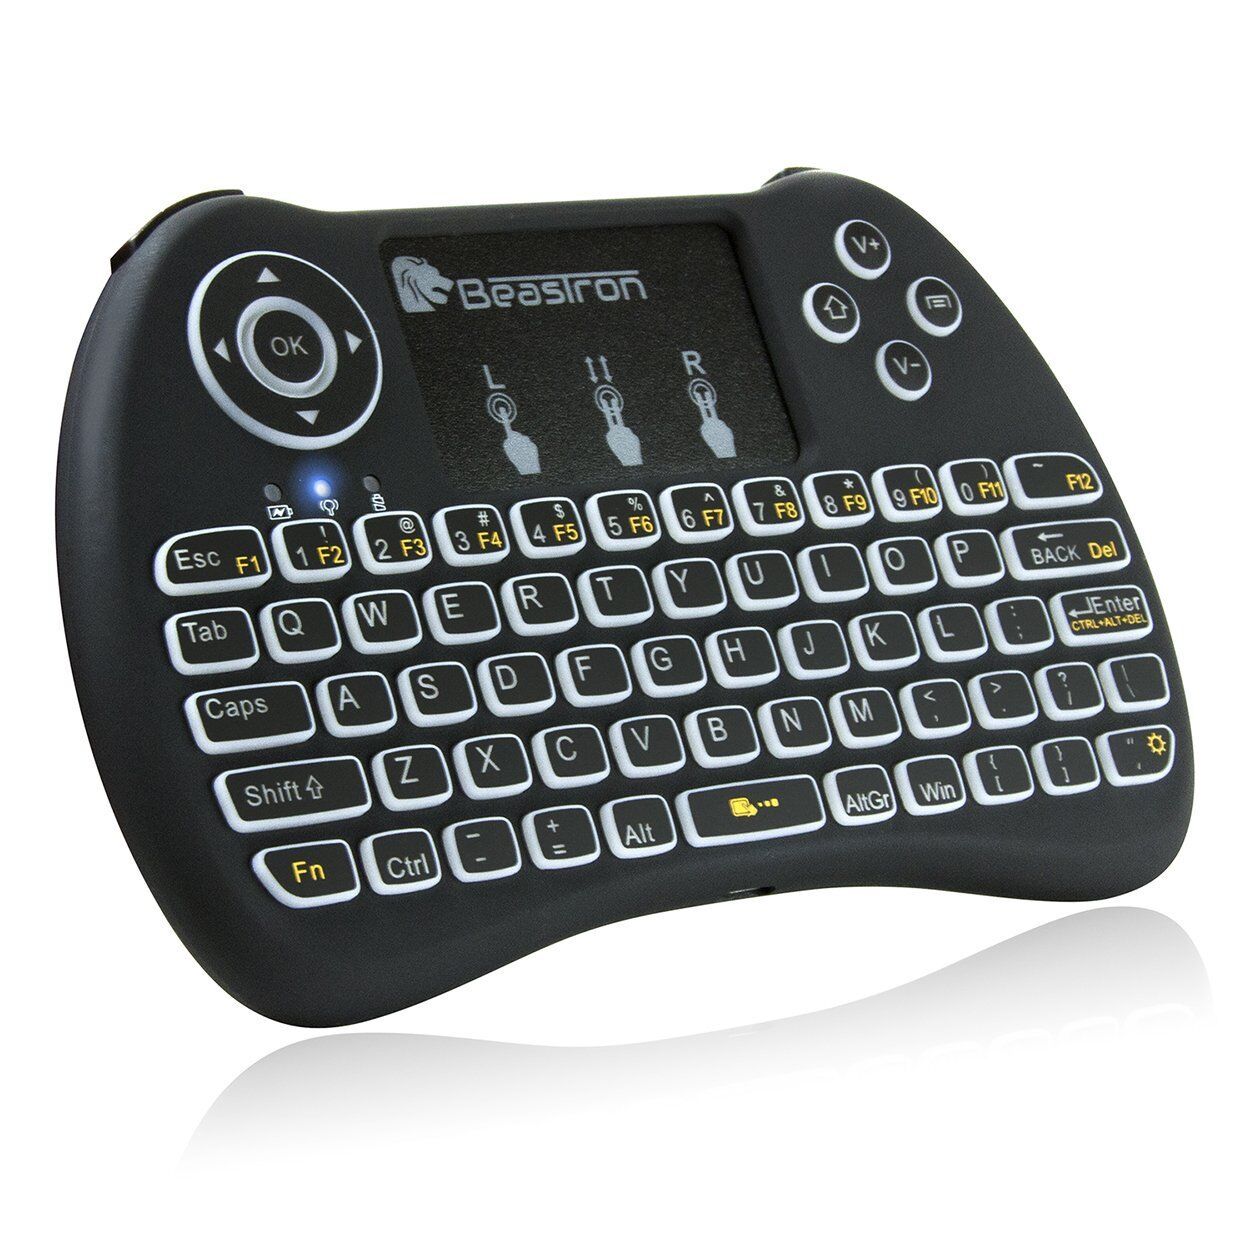 Genuine Beastron 2.4GHz Mini Wireless Keyboard with Touchpad Rechargeable Combo